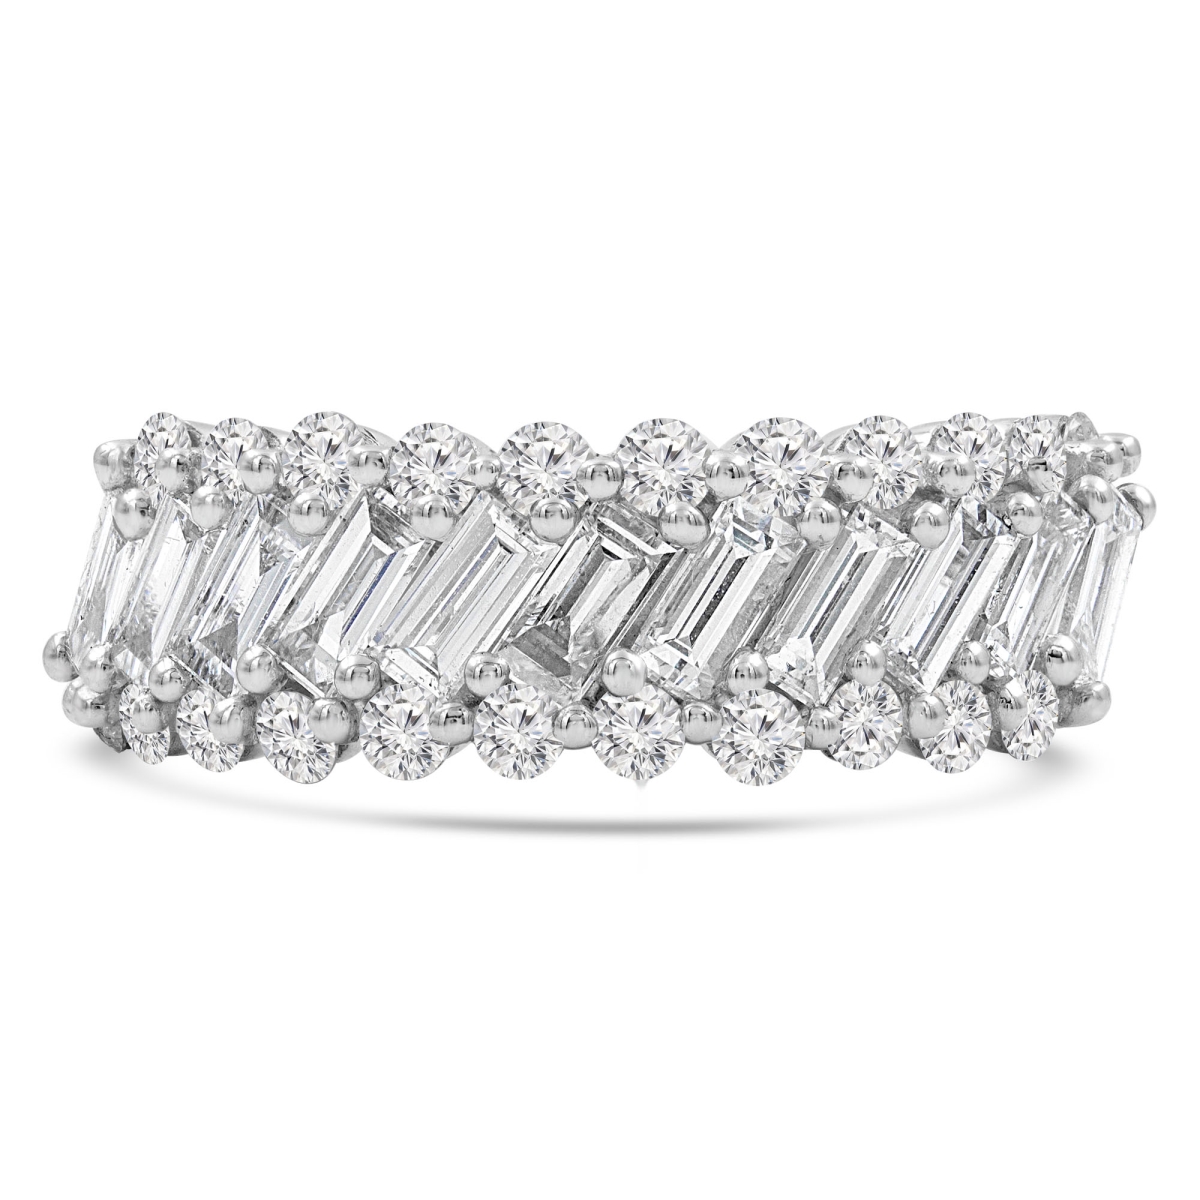 Picture of Majesty Diamonds MD210236-3 1.6 CTW Baguette Diamond Three-Row Cocktail Anniversary Band Ring in 18K White Gold - Size 3